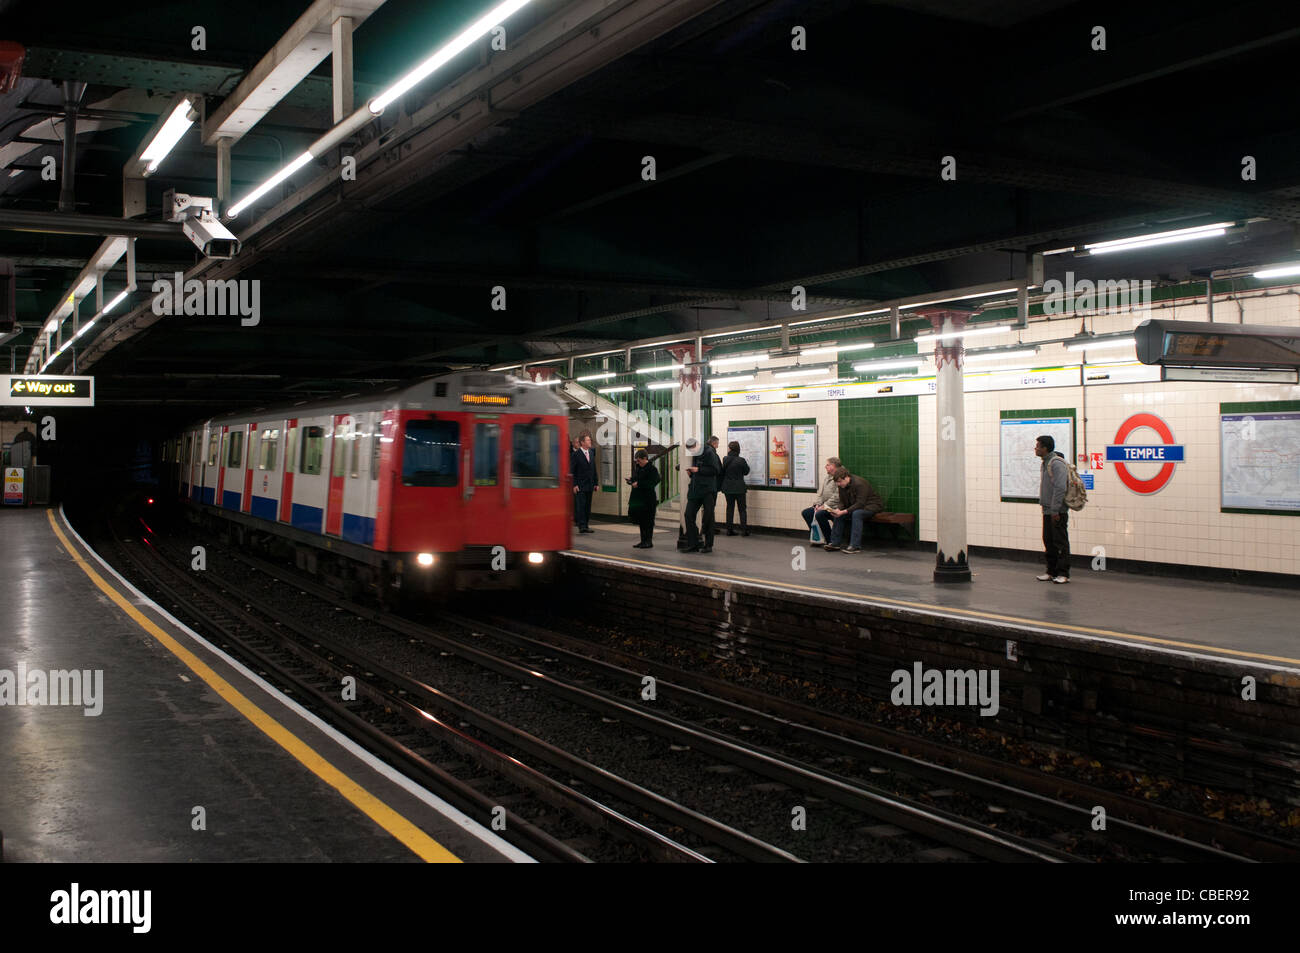 A District Line Train Arriving at Temple Underground Station, London, England, UK Stock Photo